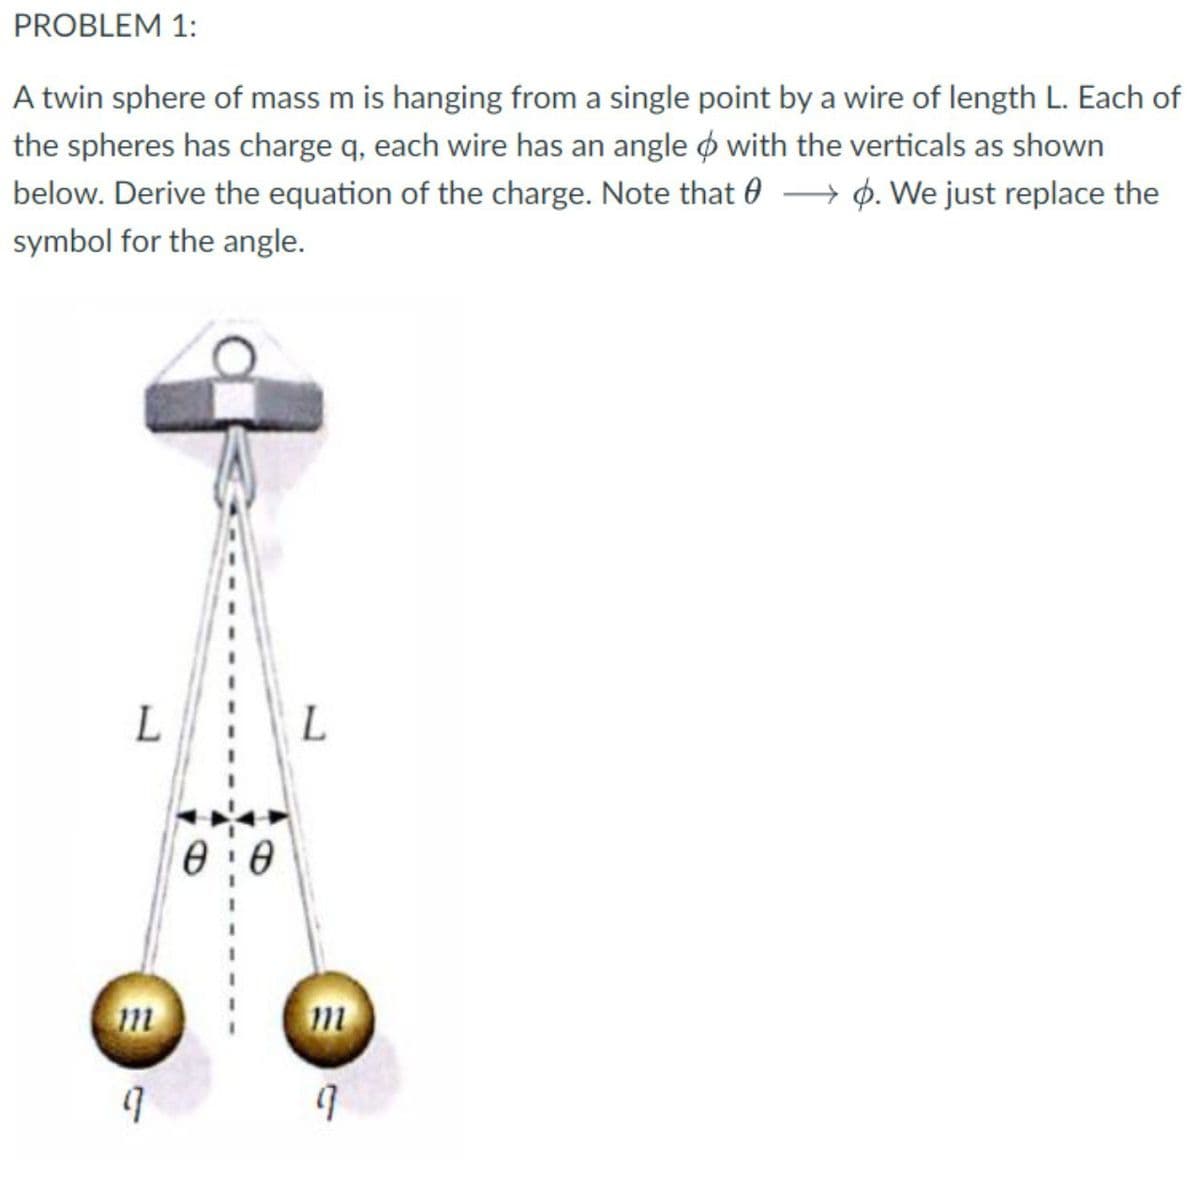 PROBLEM 1:
A twin sphere of mass m is hanging from a single point by a wire of length L. Each of
the spheres has charge q, each wire has an angle o with the verticals as shown
below. Derive the equation of the charge. Note that 0 –→ ¢. We just replace the
symbol for the angle.
0:0
m
